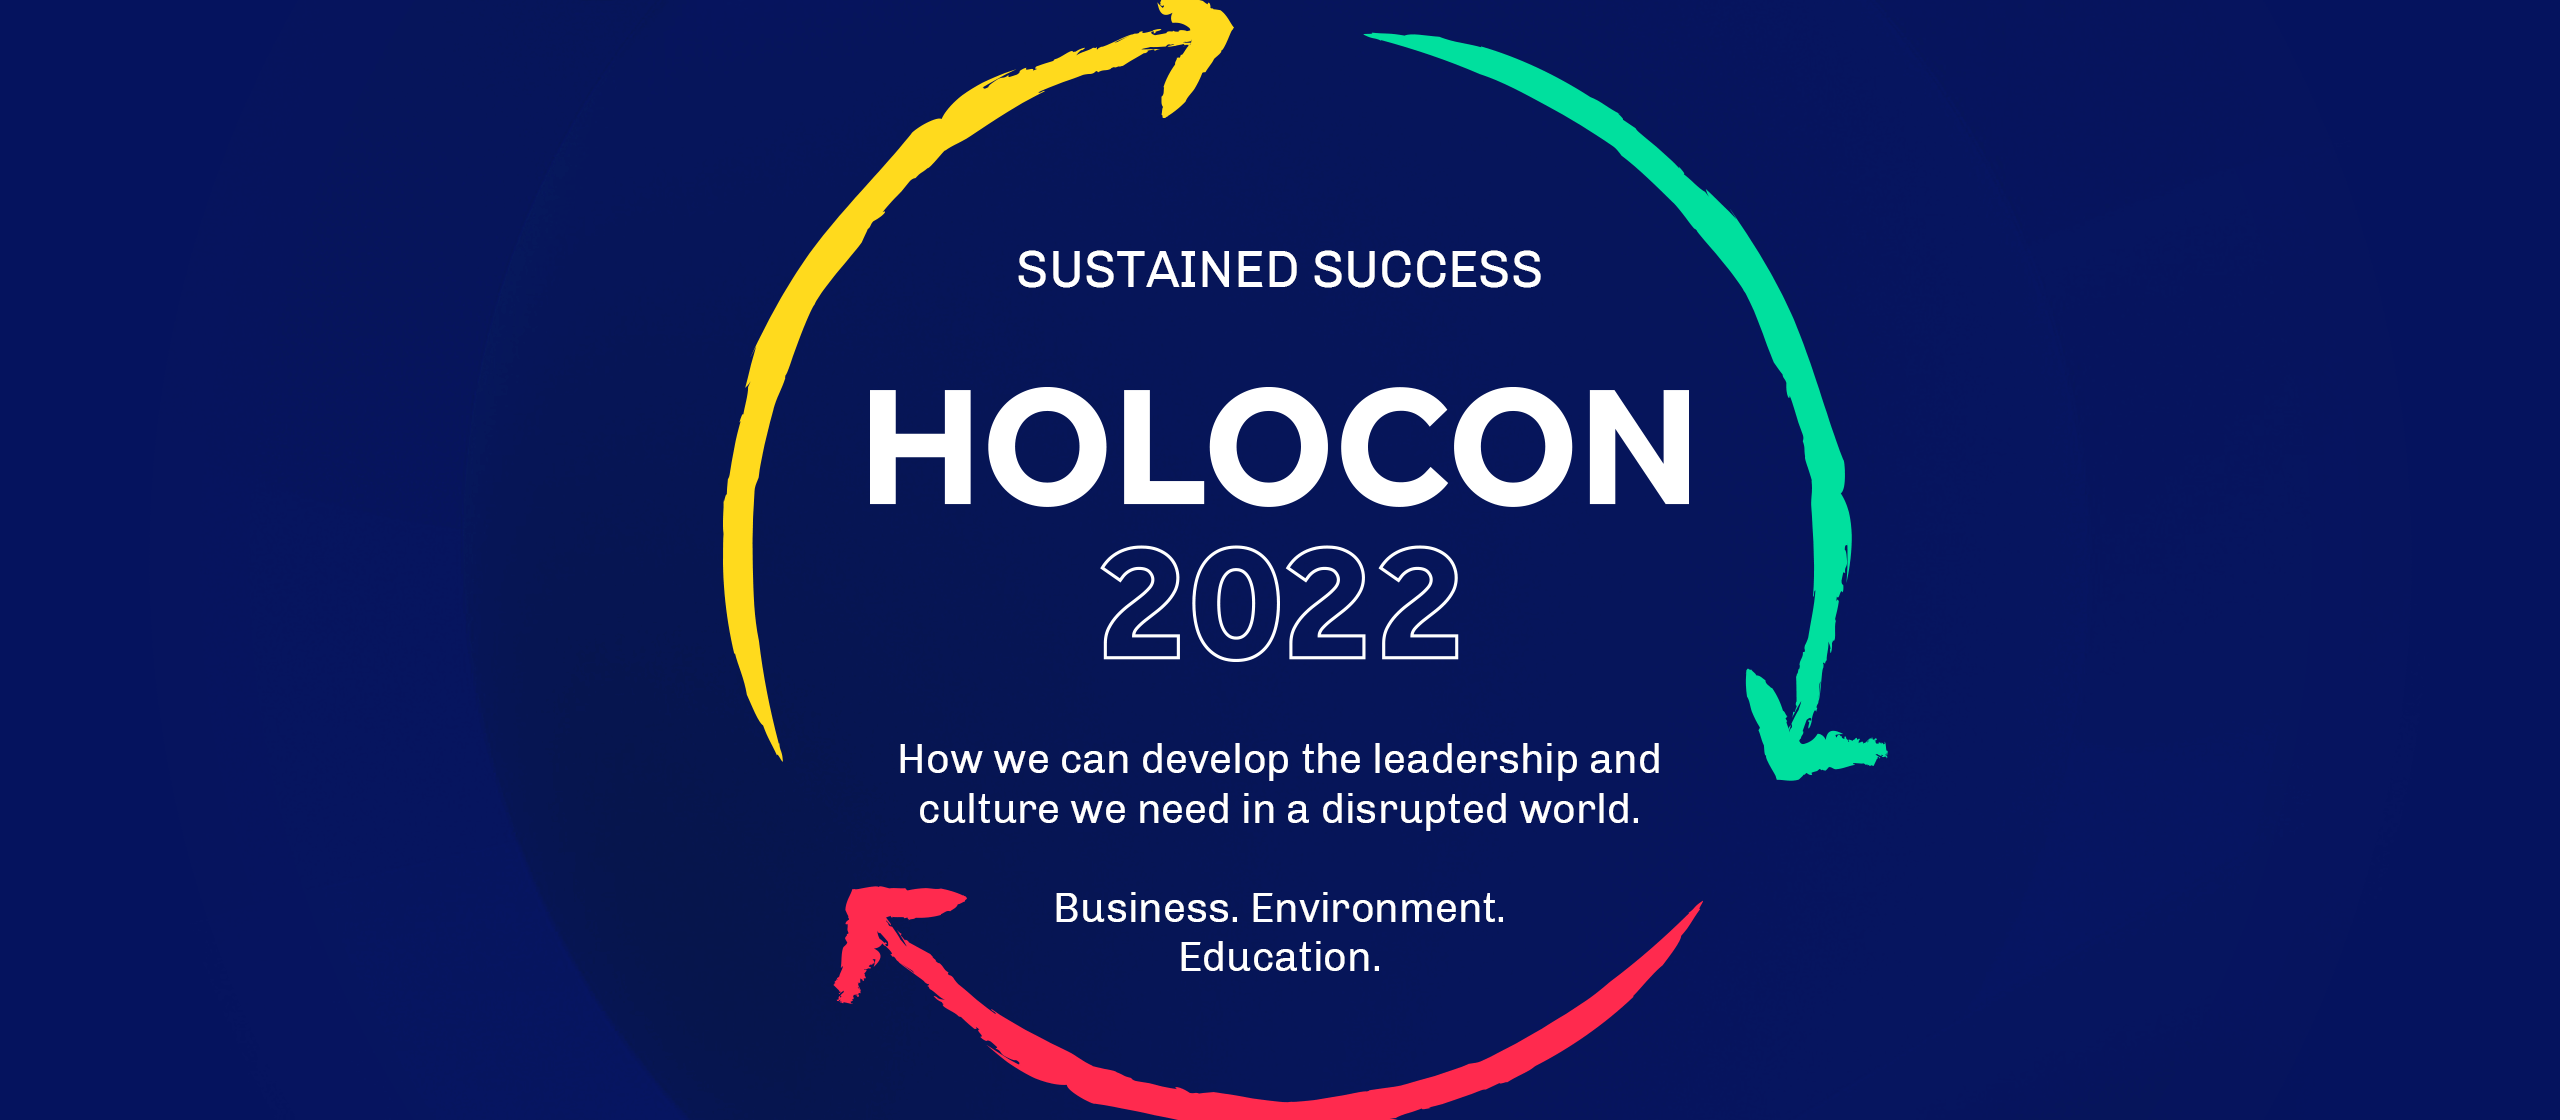 Sustained Success - Holocon 2022 - How we can develop the leadership and culture we need in a disrupted world. Business. Environment. Education.